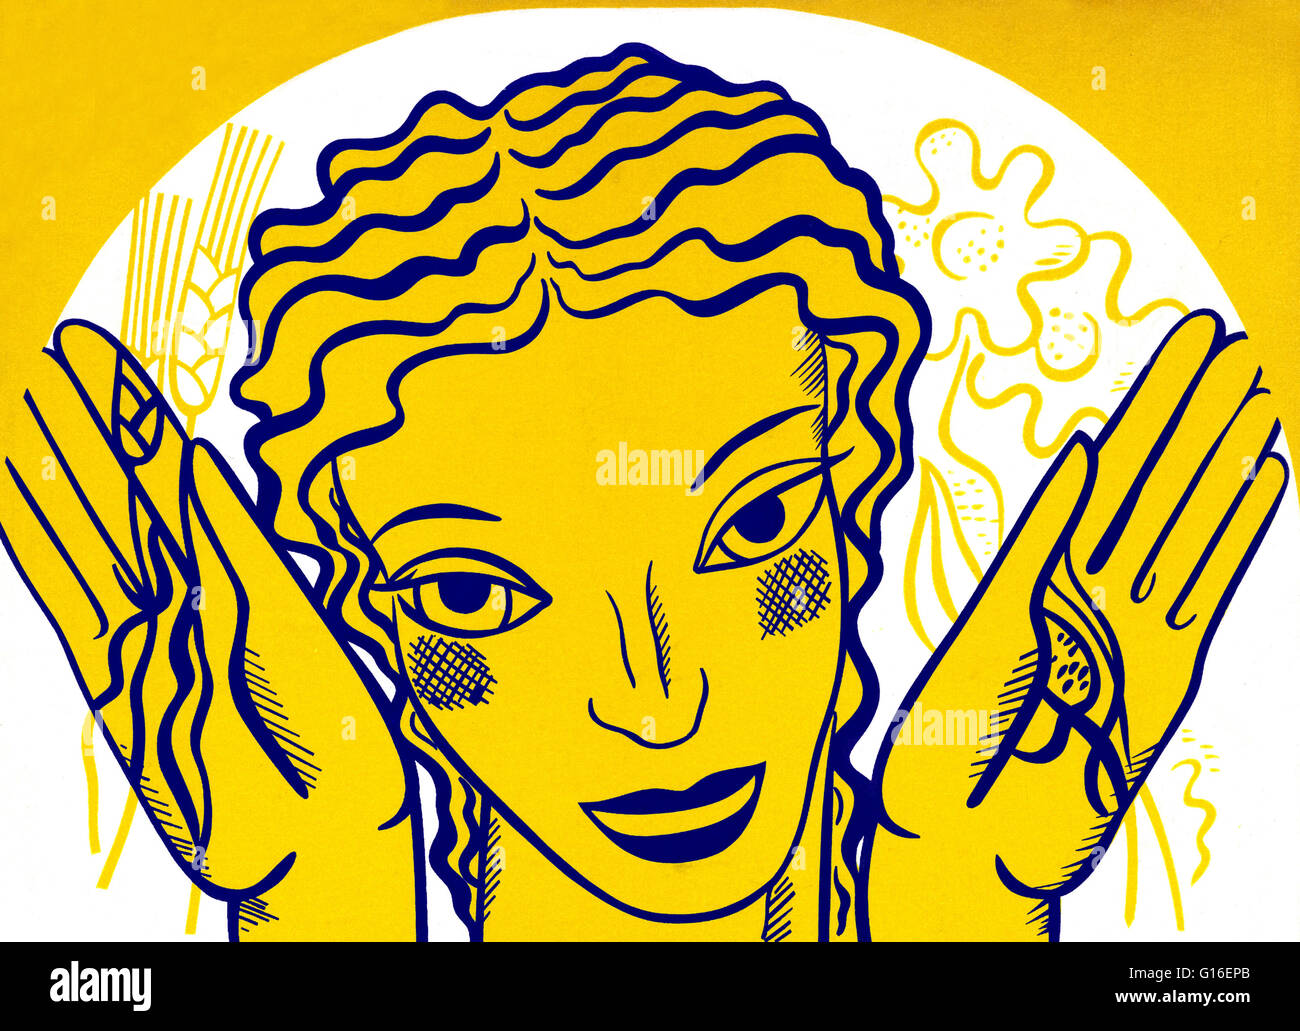 WPA poster design on yellow background showing the head and hands of a woman holding flowers and wheat. The Federal Art Project (FAP) was the visual arts arm of the Great Depression era New Deal Works Progress Administration Federal Project Number One pro Stock Photo